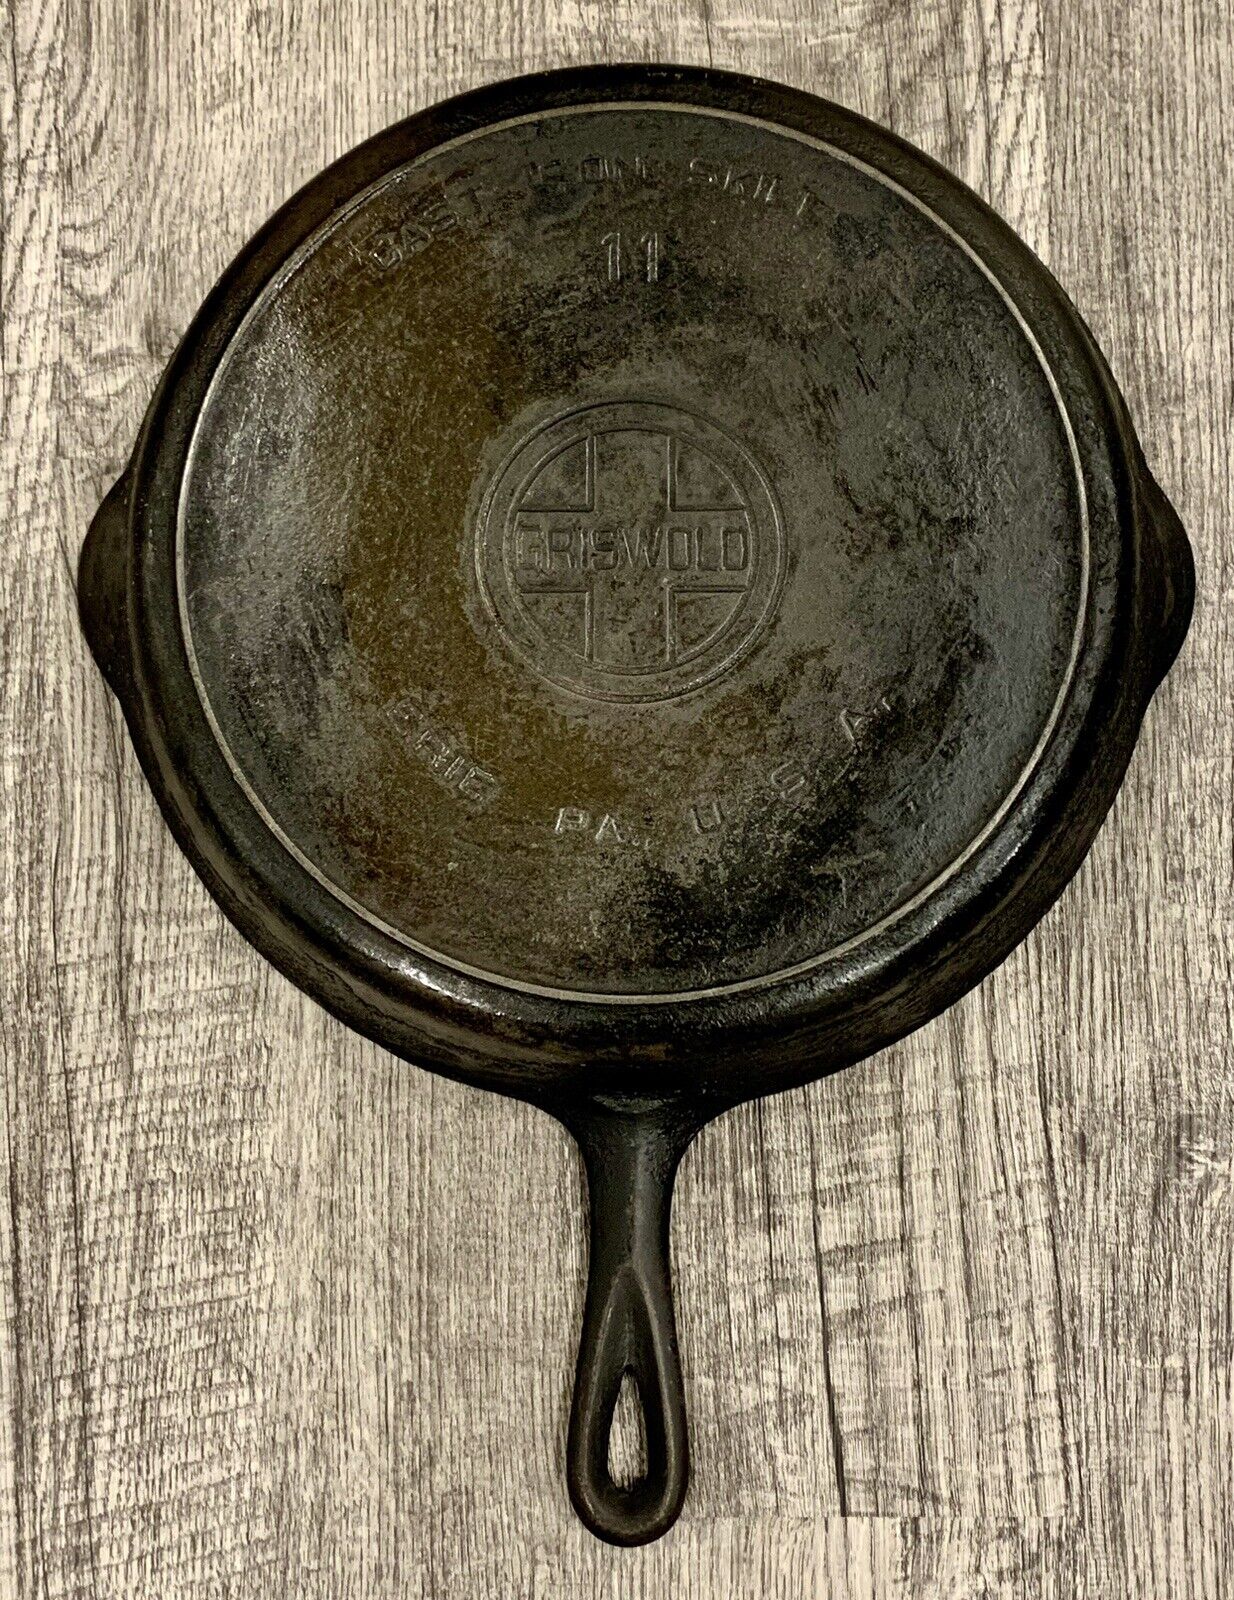 Griswold Cast Iron Skillet #11 Large Block Logo 717 With Heat Ring Rare 🔥